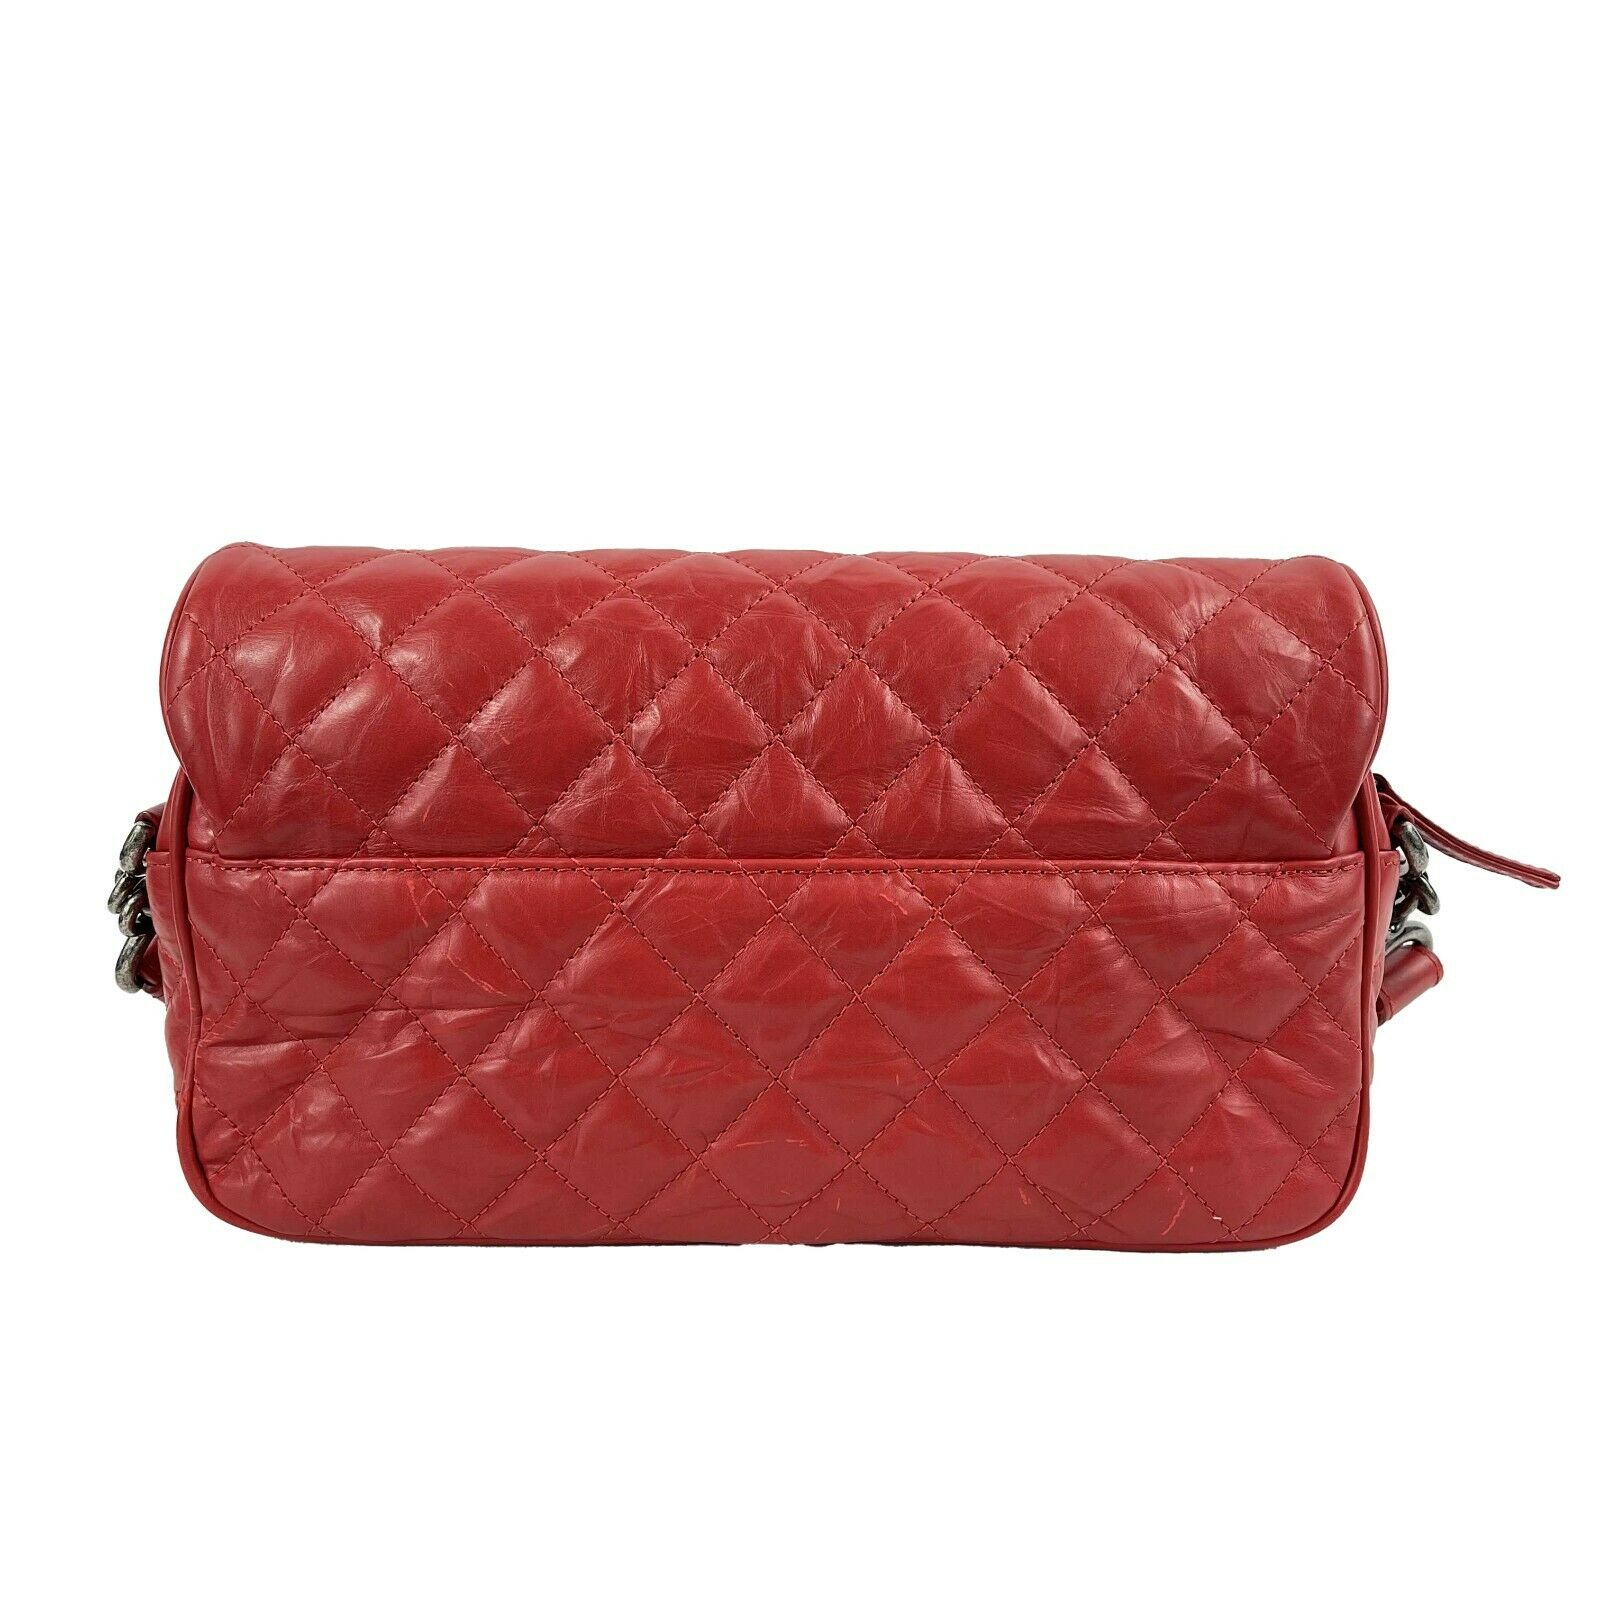 Chanel Red Quilted Caviar Leather On The Road Tote